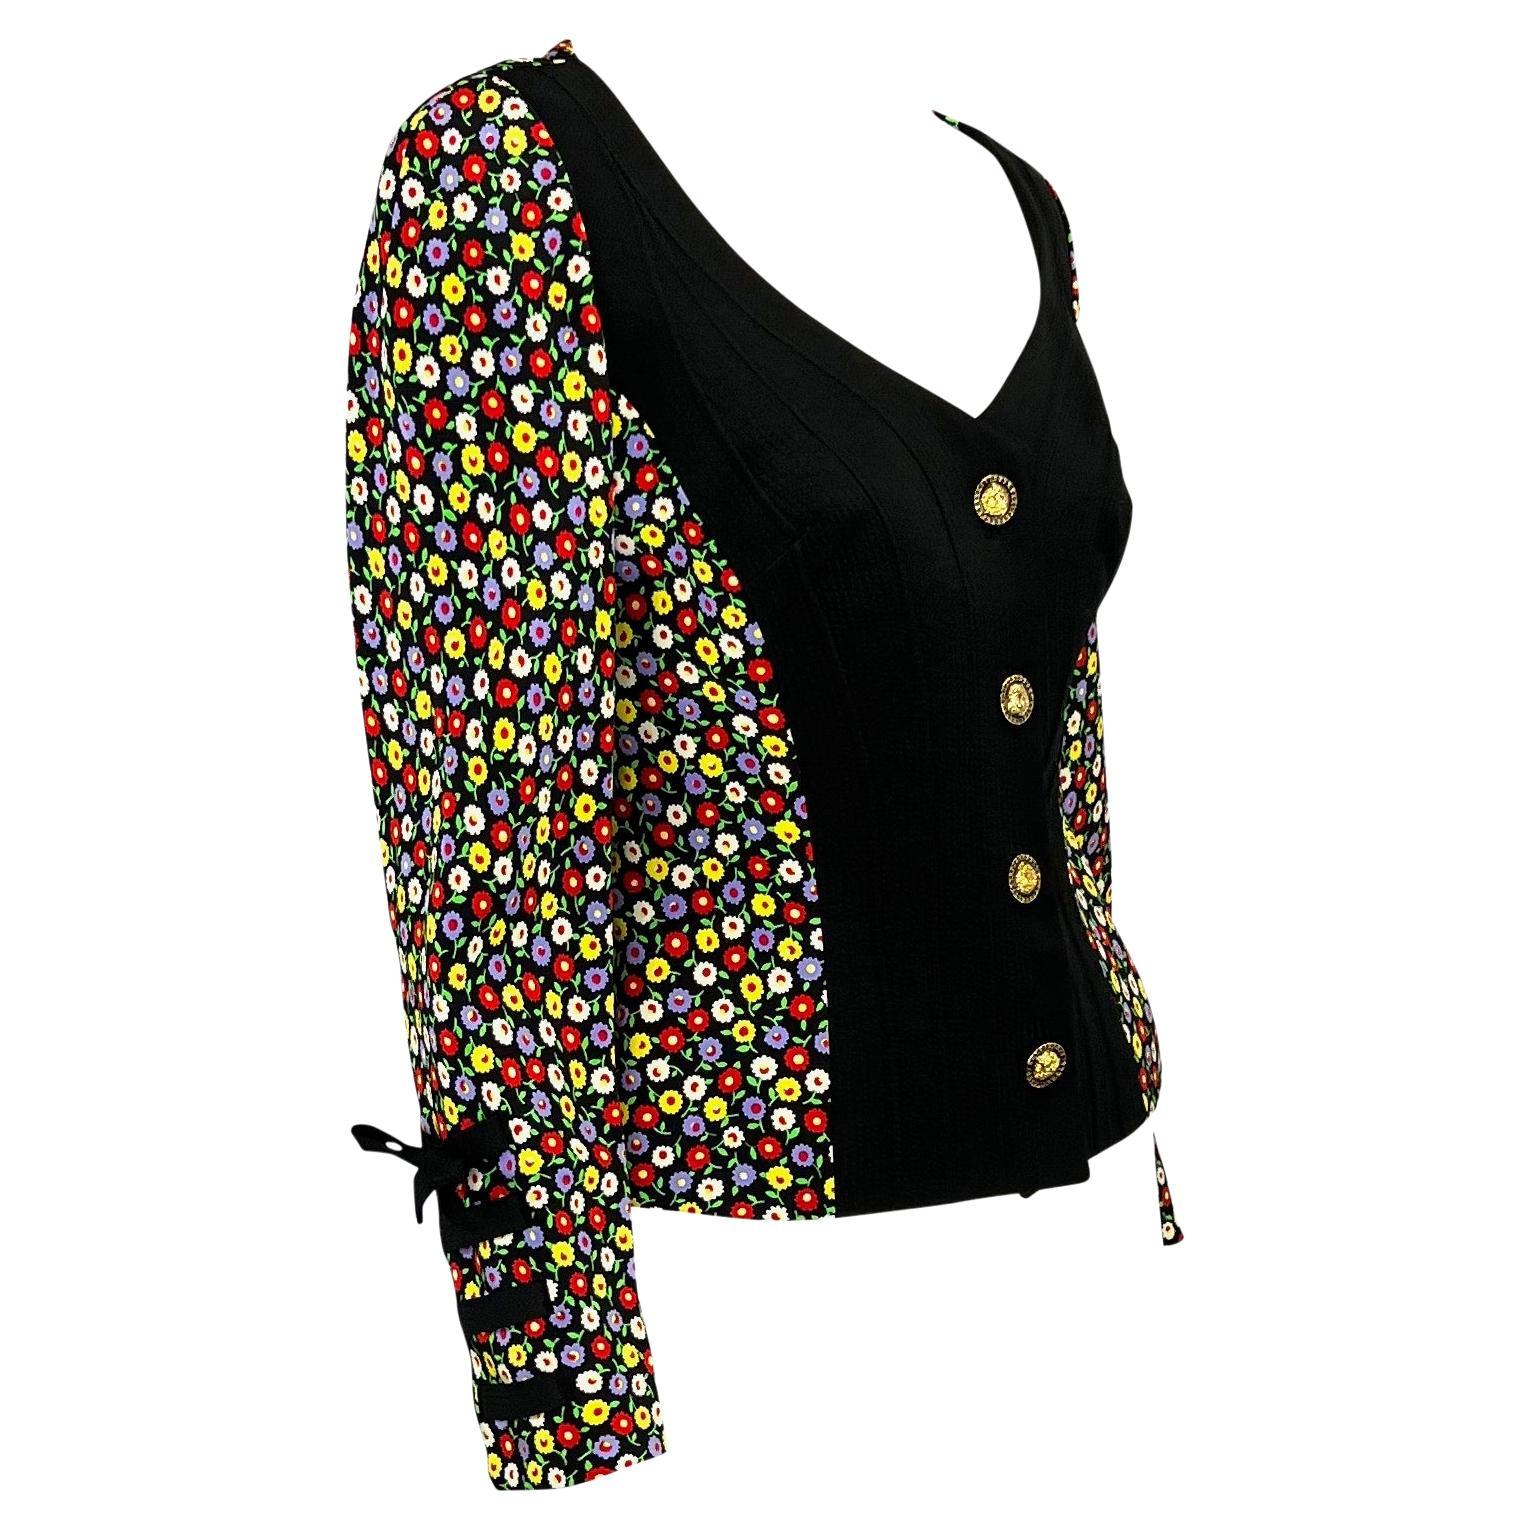 S/S 1993 Gianni Versace Couture Runway Floral Bustier Ribbon Blazer Jacket For Sale 3